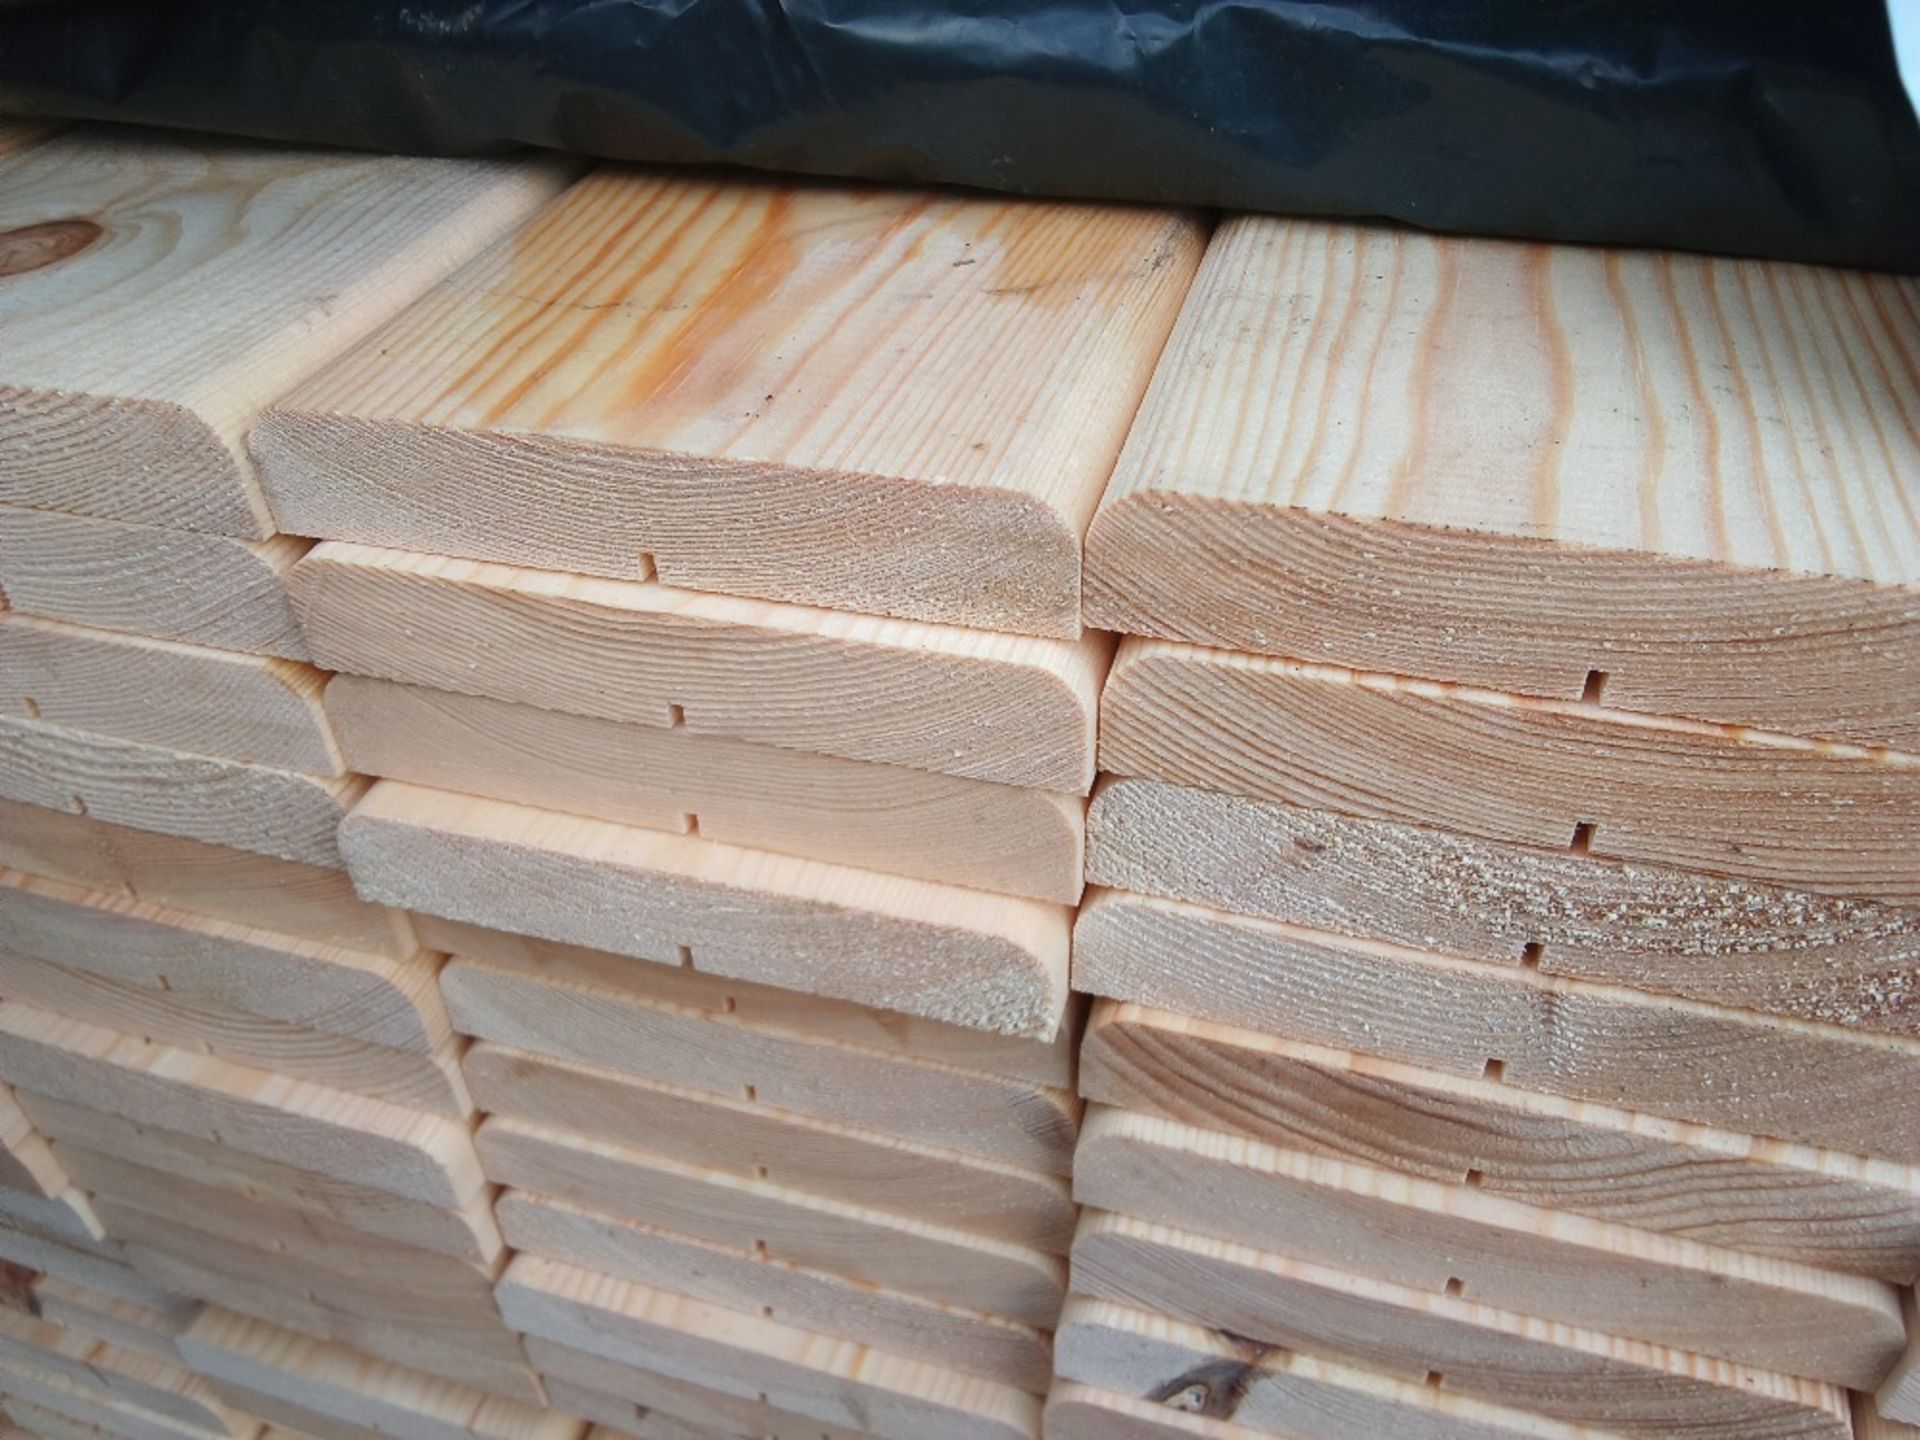 PACK OF UNTREATED TIMBER CAPPING BOARDS 1.88M LENGTH X 120MM X 20MM APPROX. - Image 3 of 4